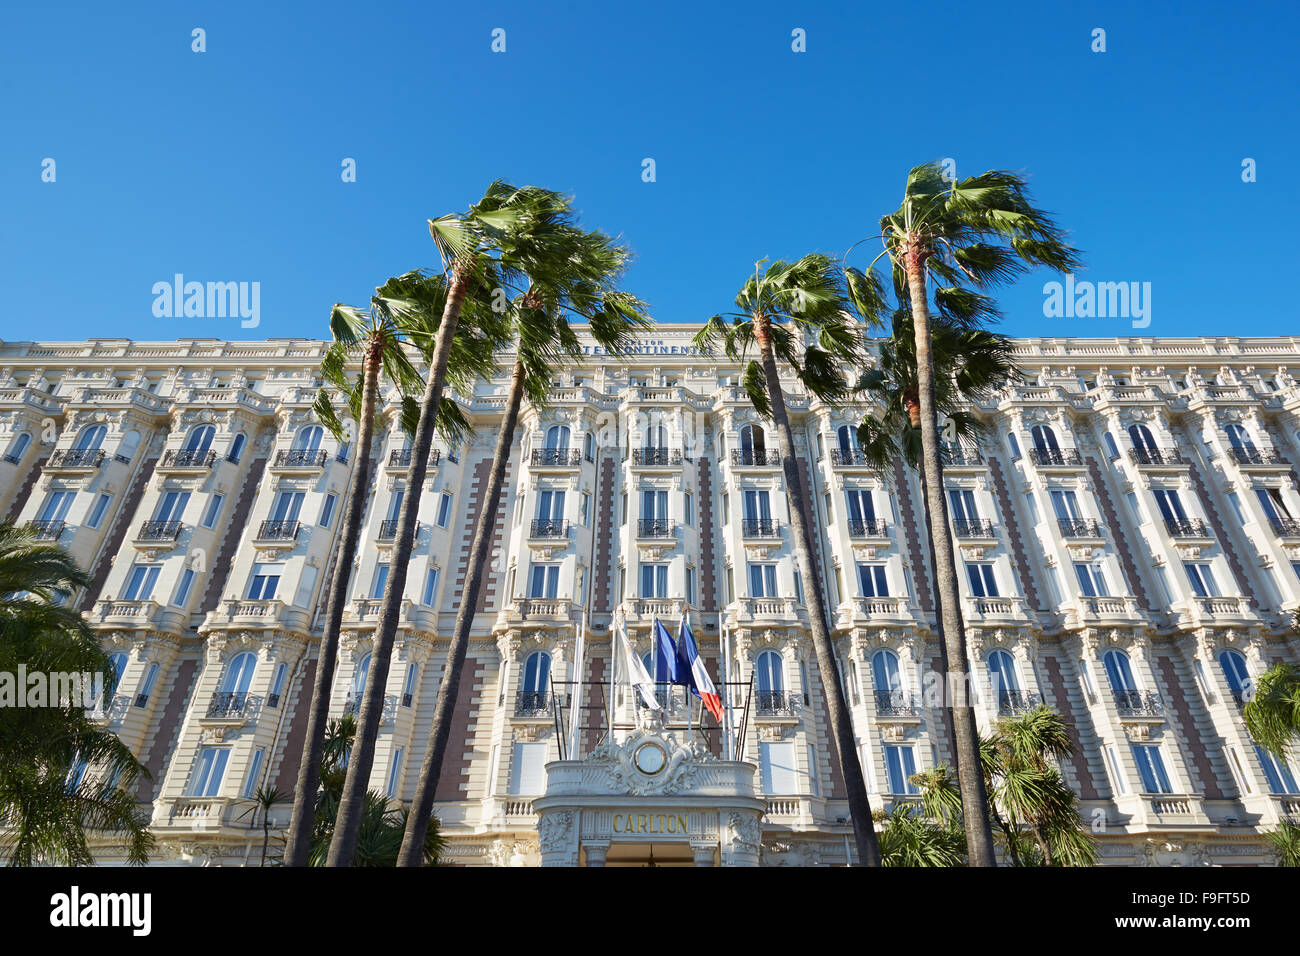 Luxury hotel InterContinental Carlton, located on the famous 'La Croisette' boulevard in Cannes, French Riviera Stock Photo